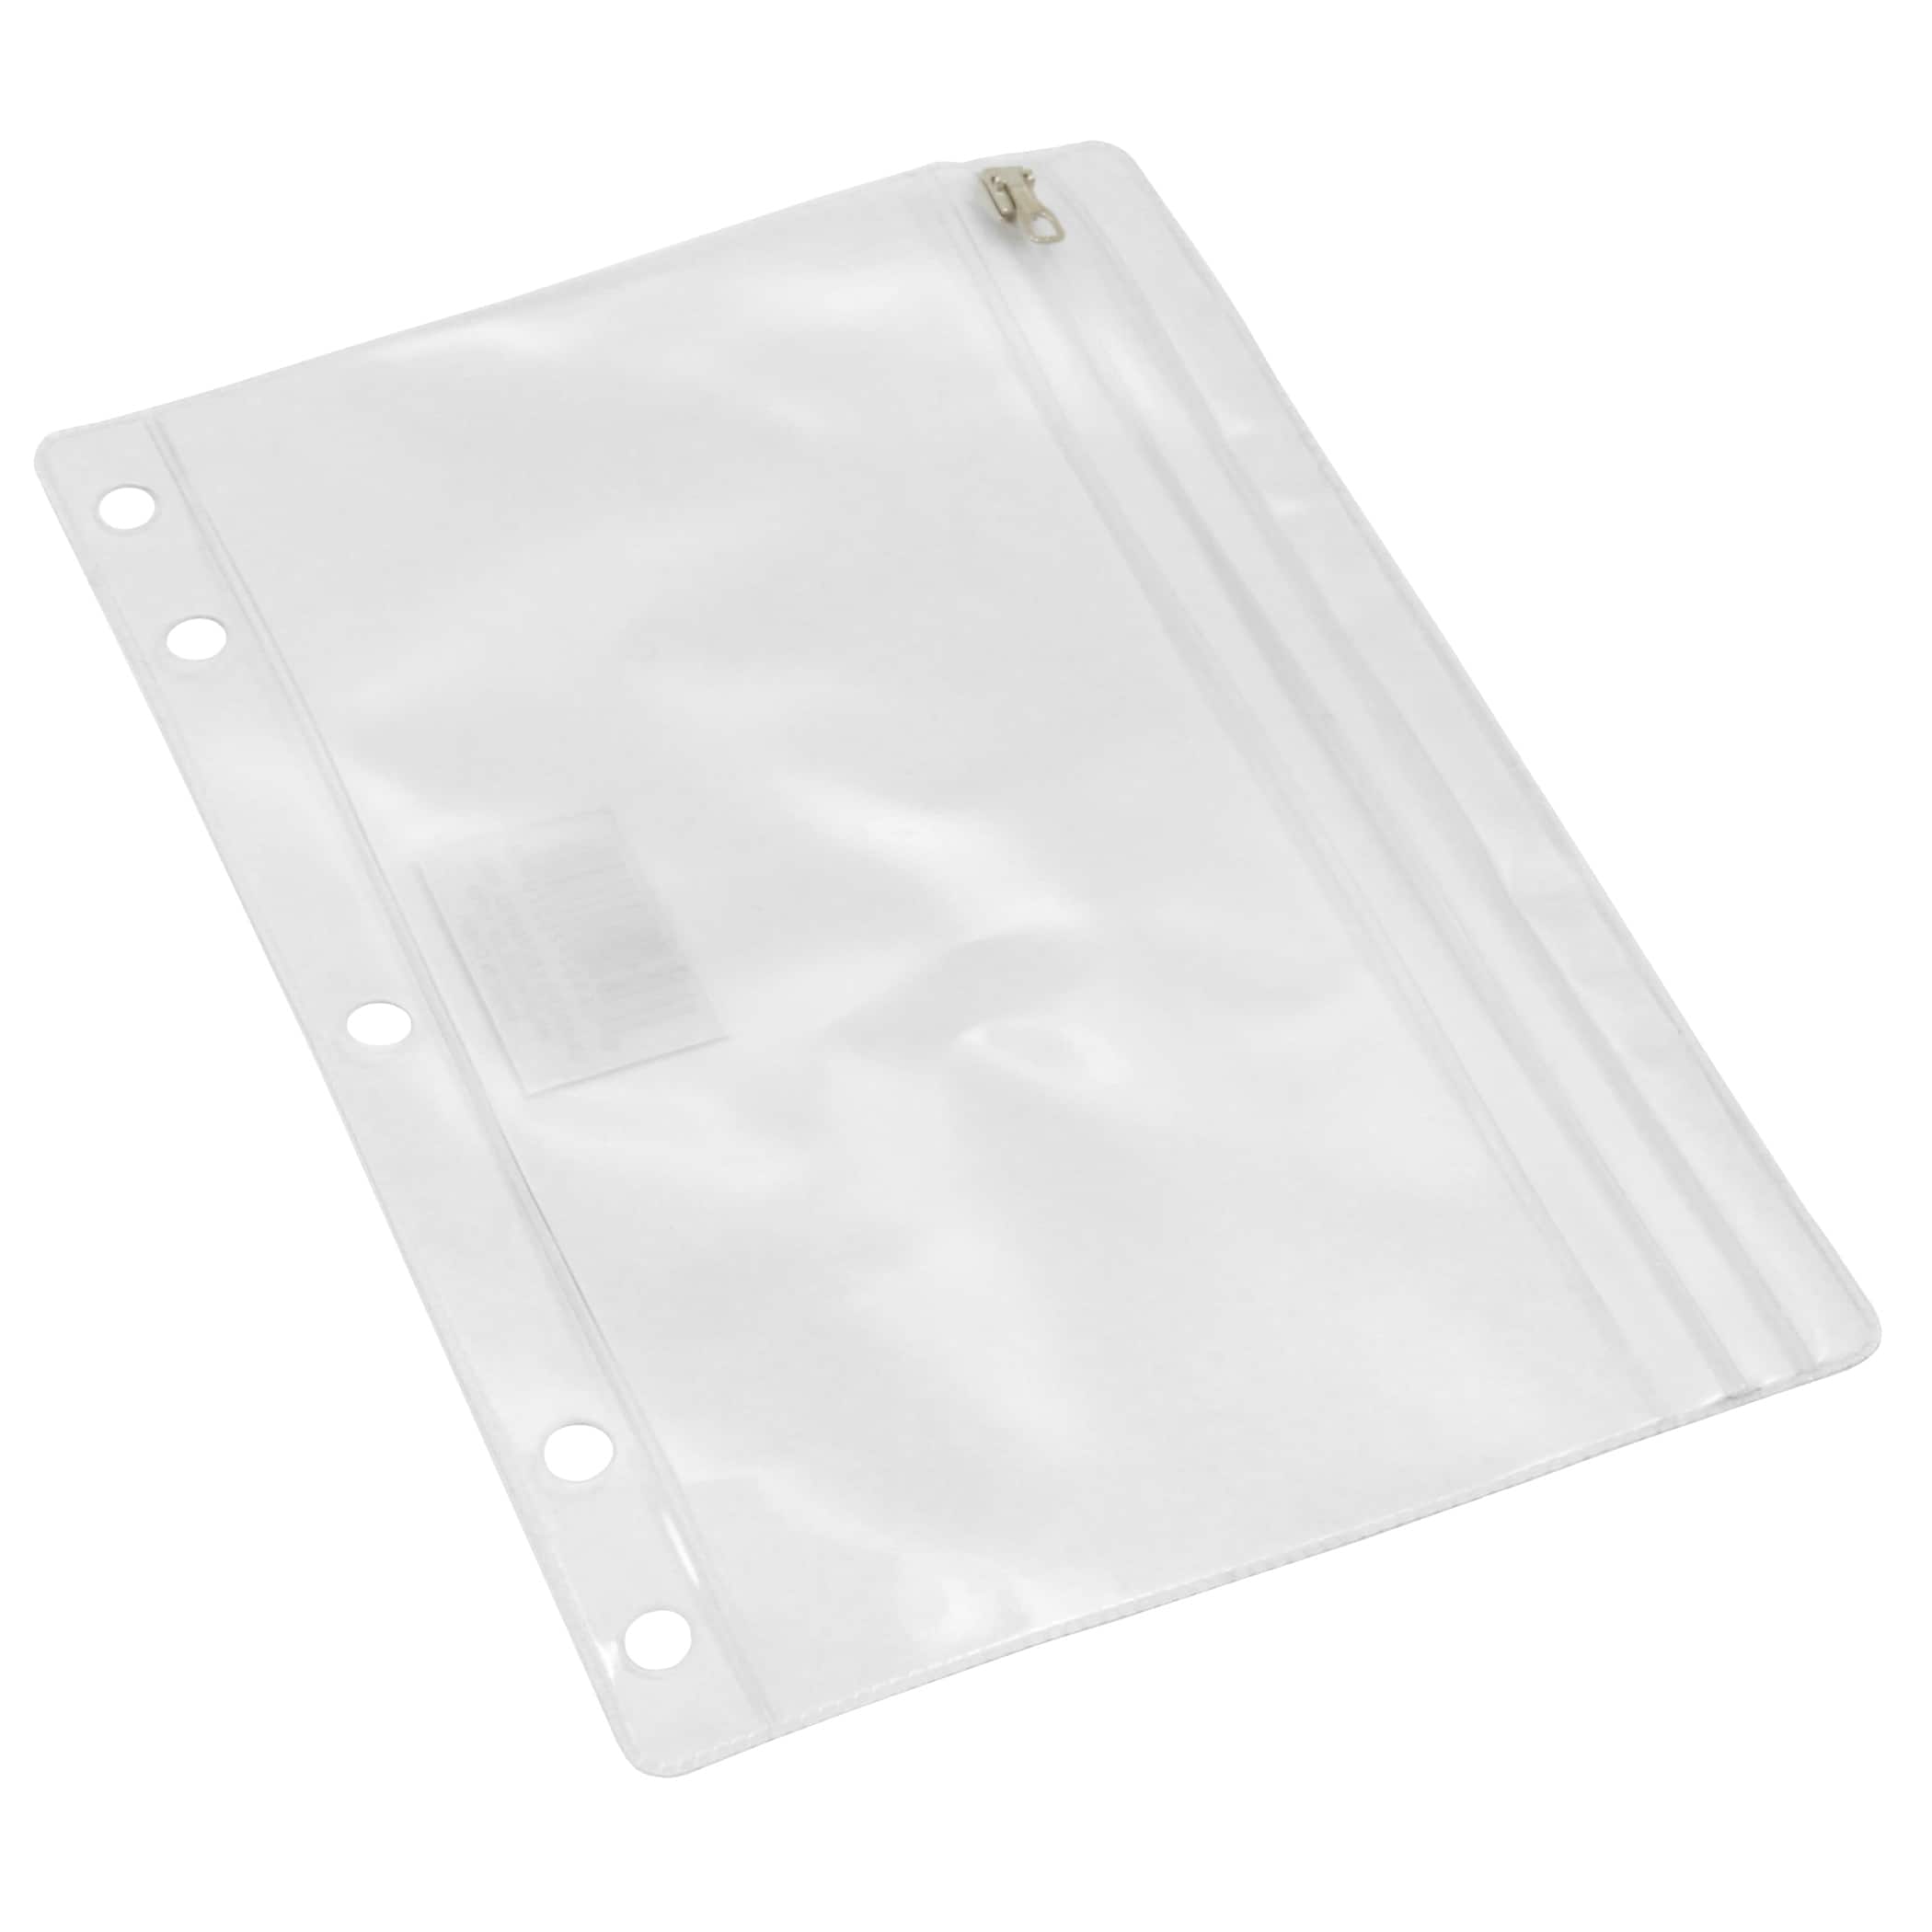 Clear Vinyl Pencil Pouch with Ziplock Closure, Pack of 24